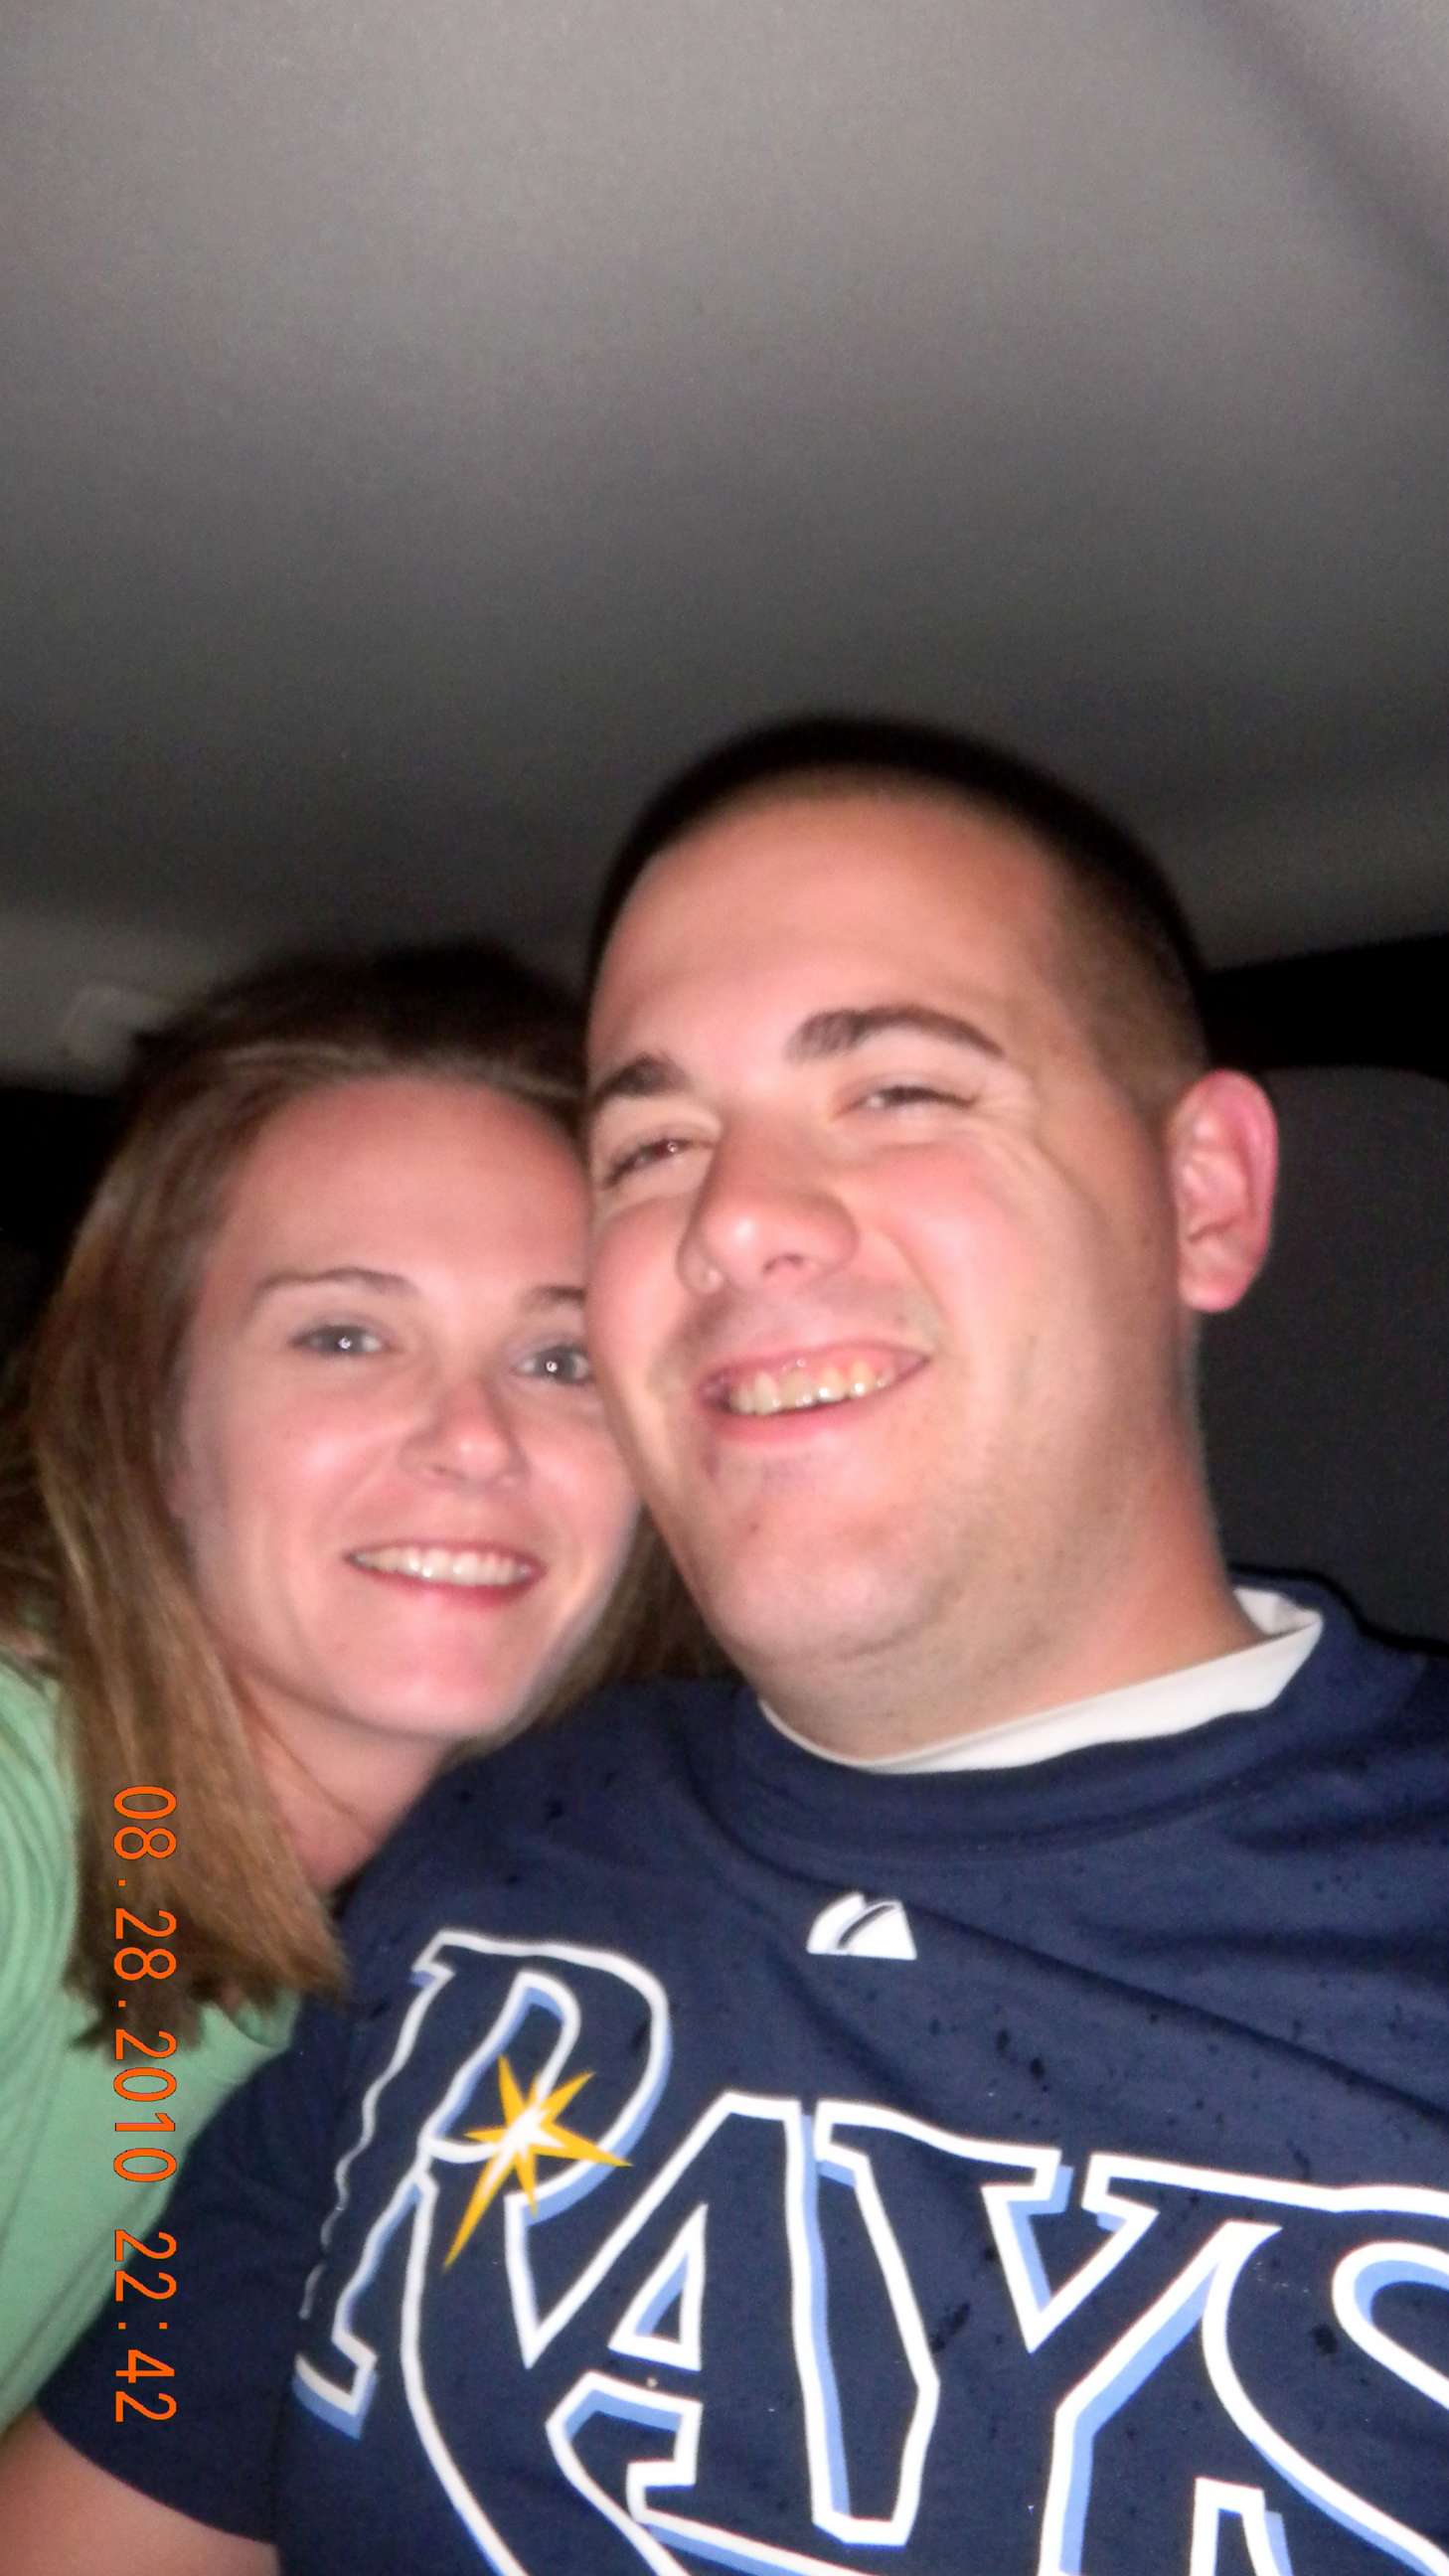 PHOTO: Michelle O'Connell broke up with her boyfriend, Jeremy Banks hours before she was found dead on Sept. 2, 2010.